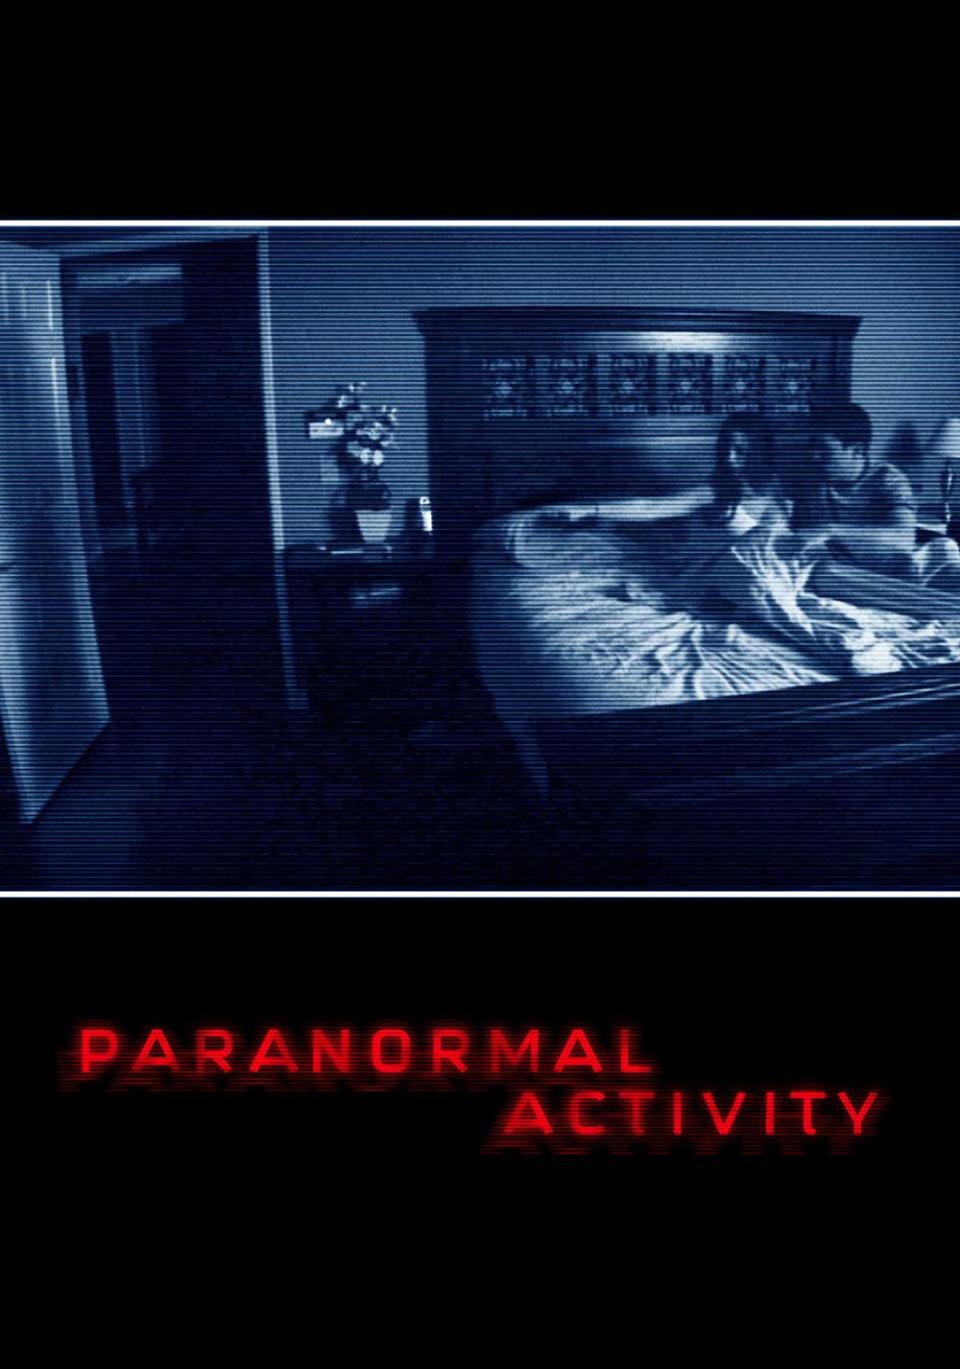 28) Paranormal Activity (2009)